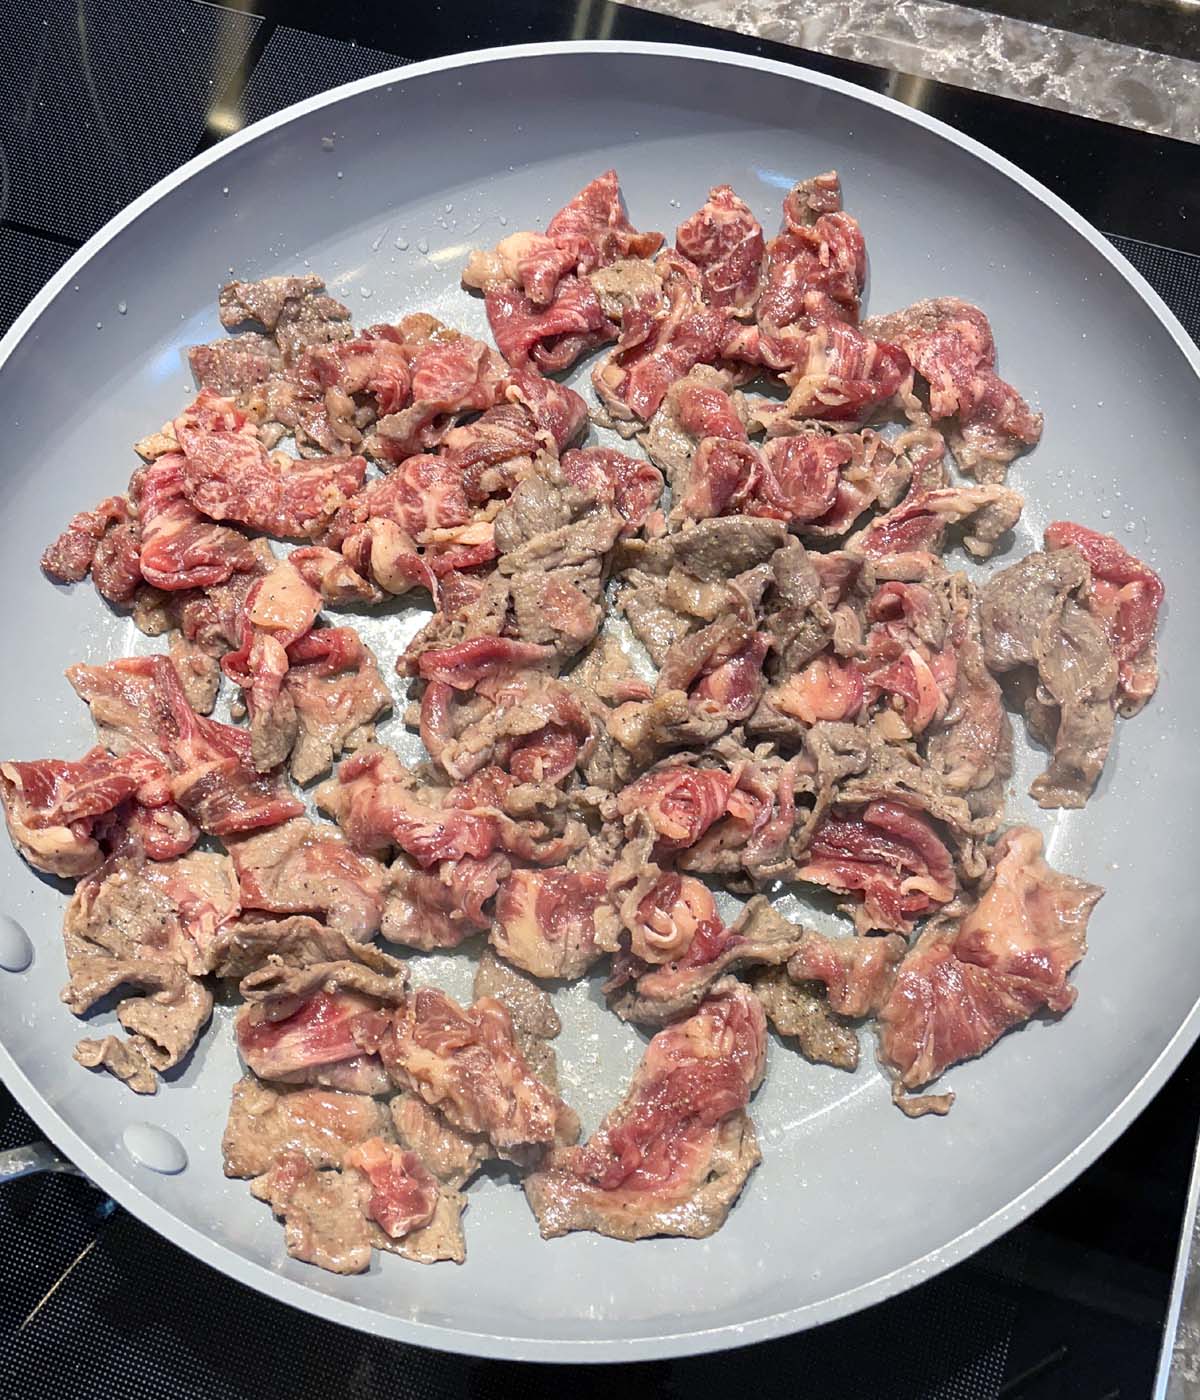 Raw slices of beef being cooked in a round grey pan.